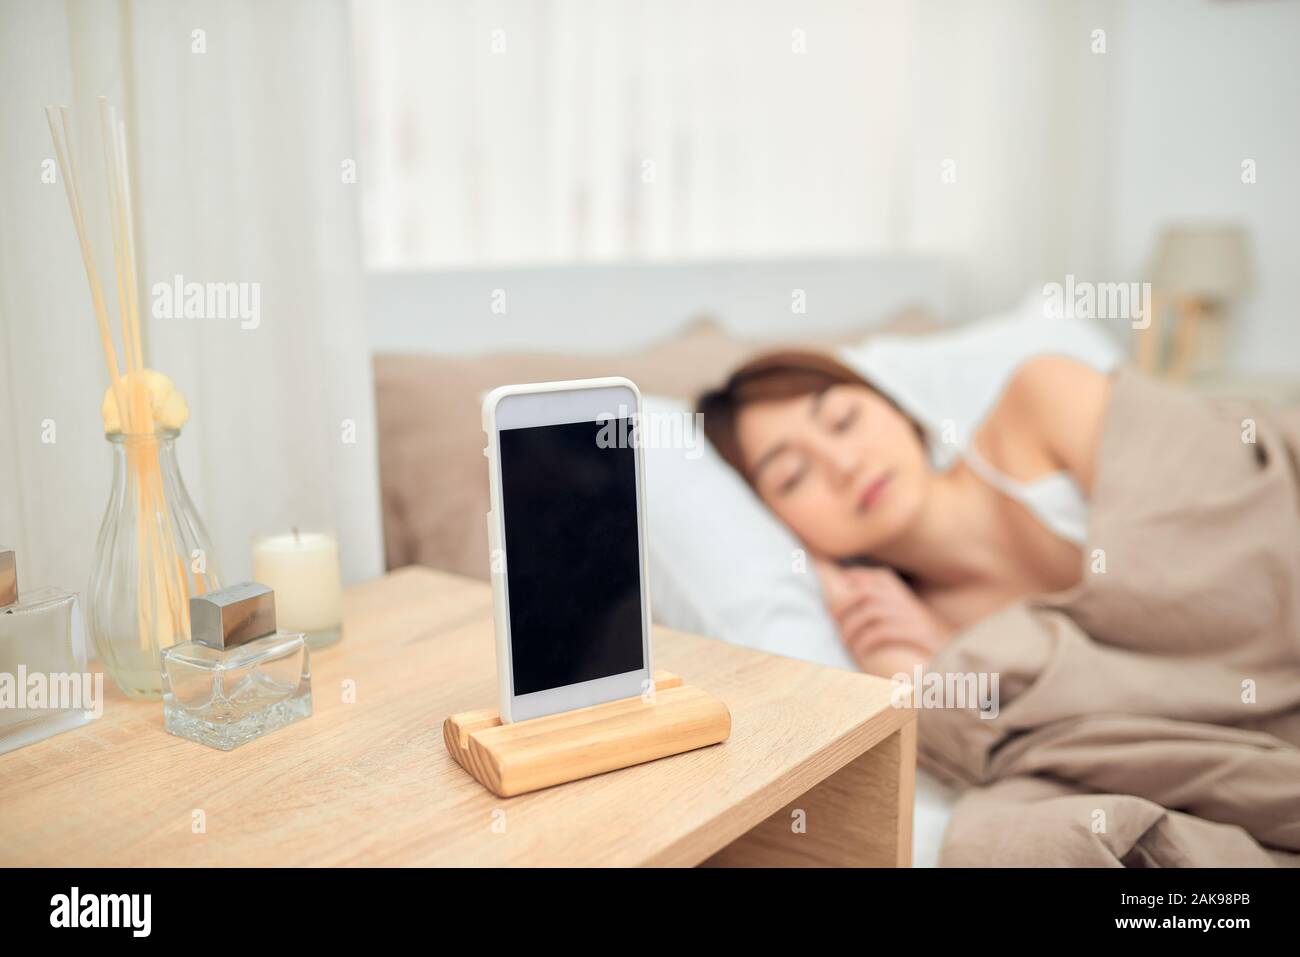 Asian Woman Asleep In Bed Woken By Alarm On Mobile Phone Stock Photo